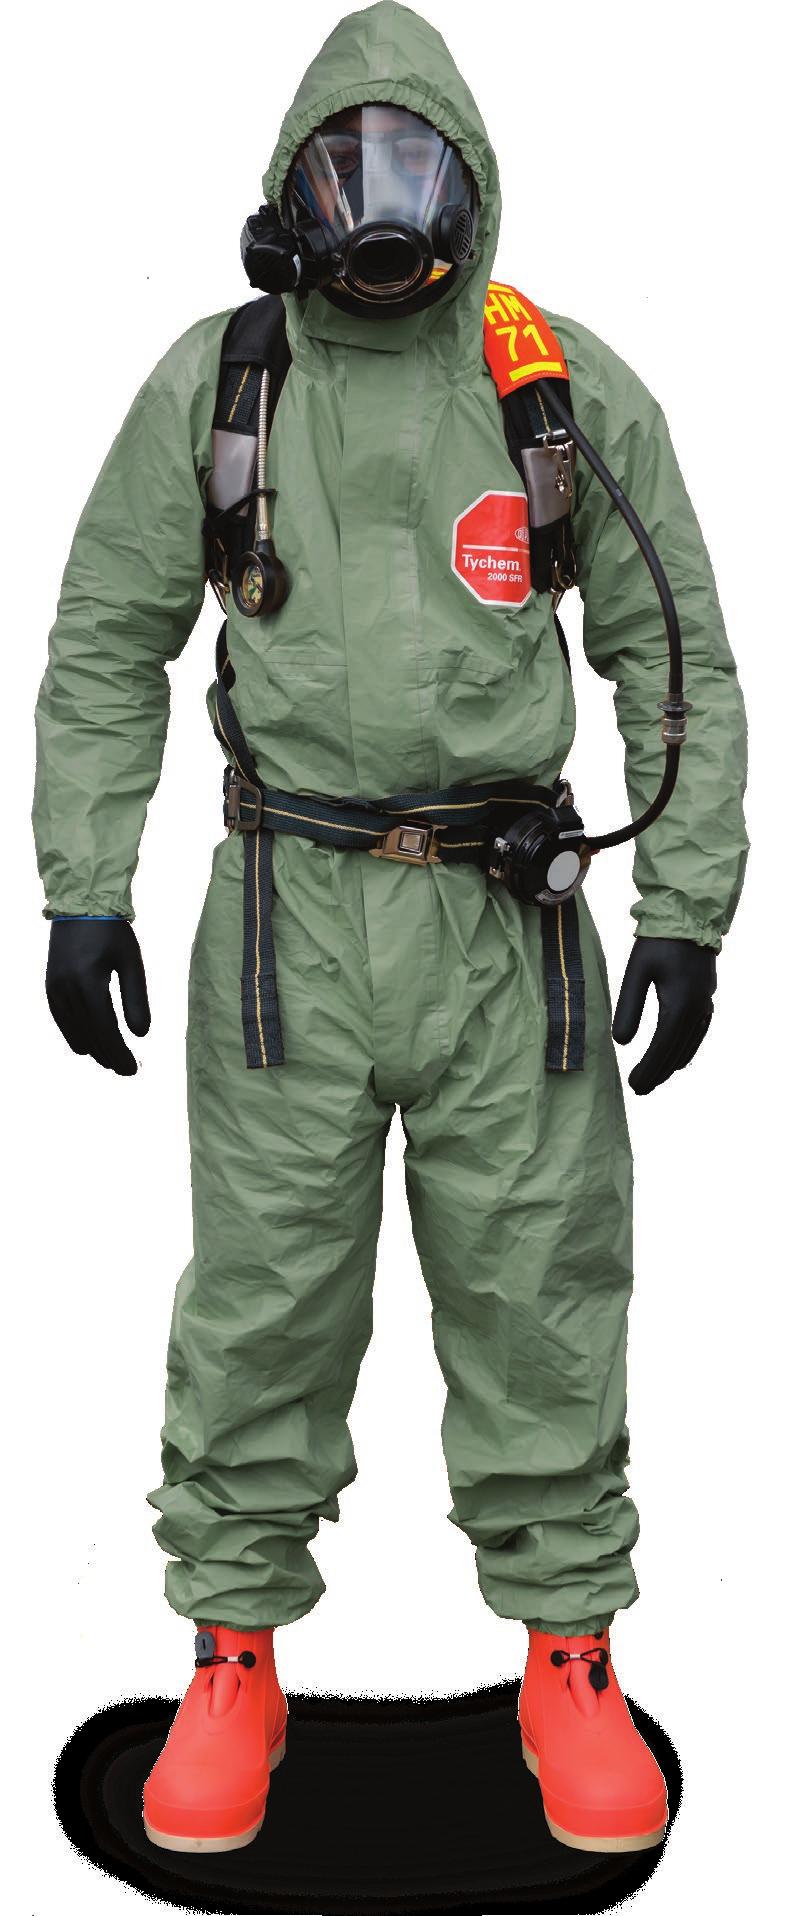 Effective yet surprisingly lightweight, every pair of Tychem 2000 SFR coveralls contains a number of protective